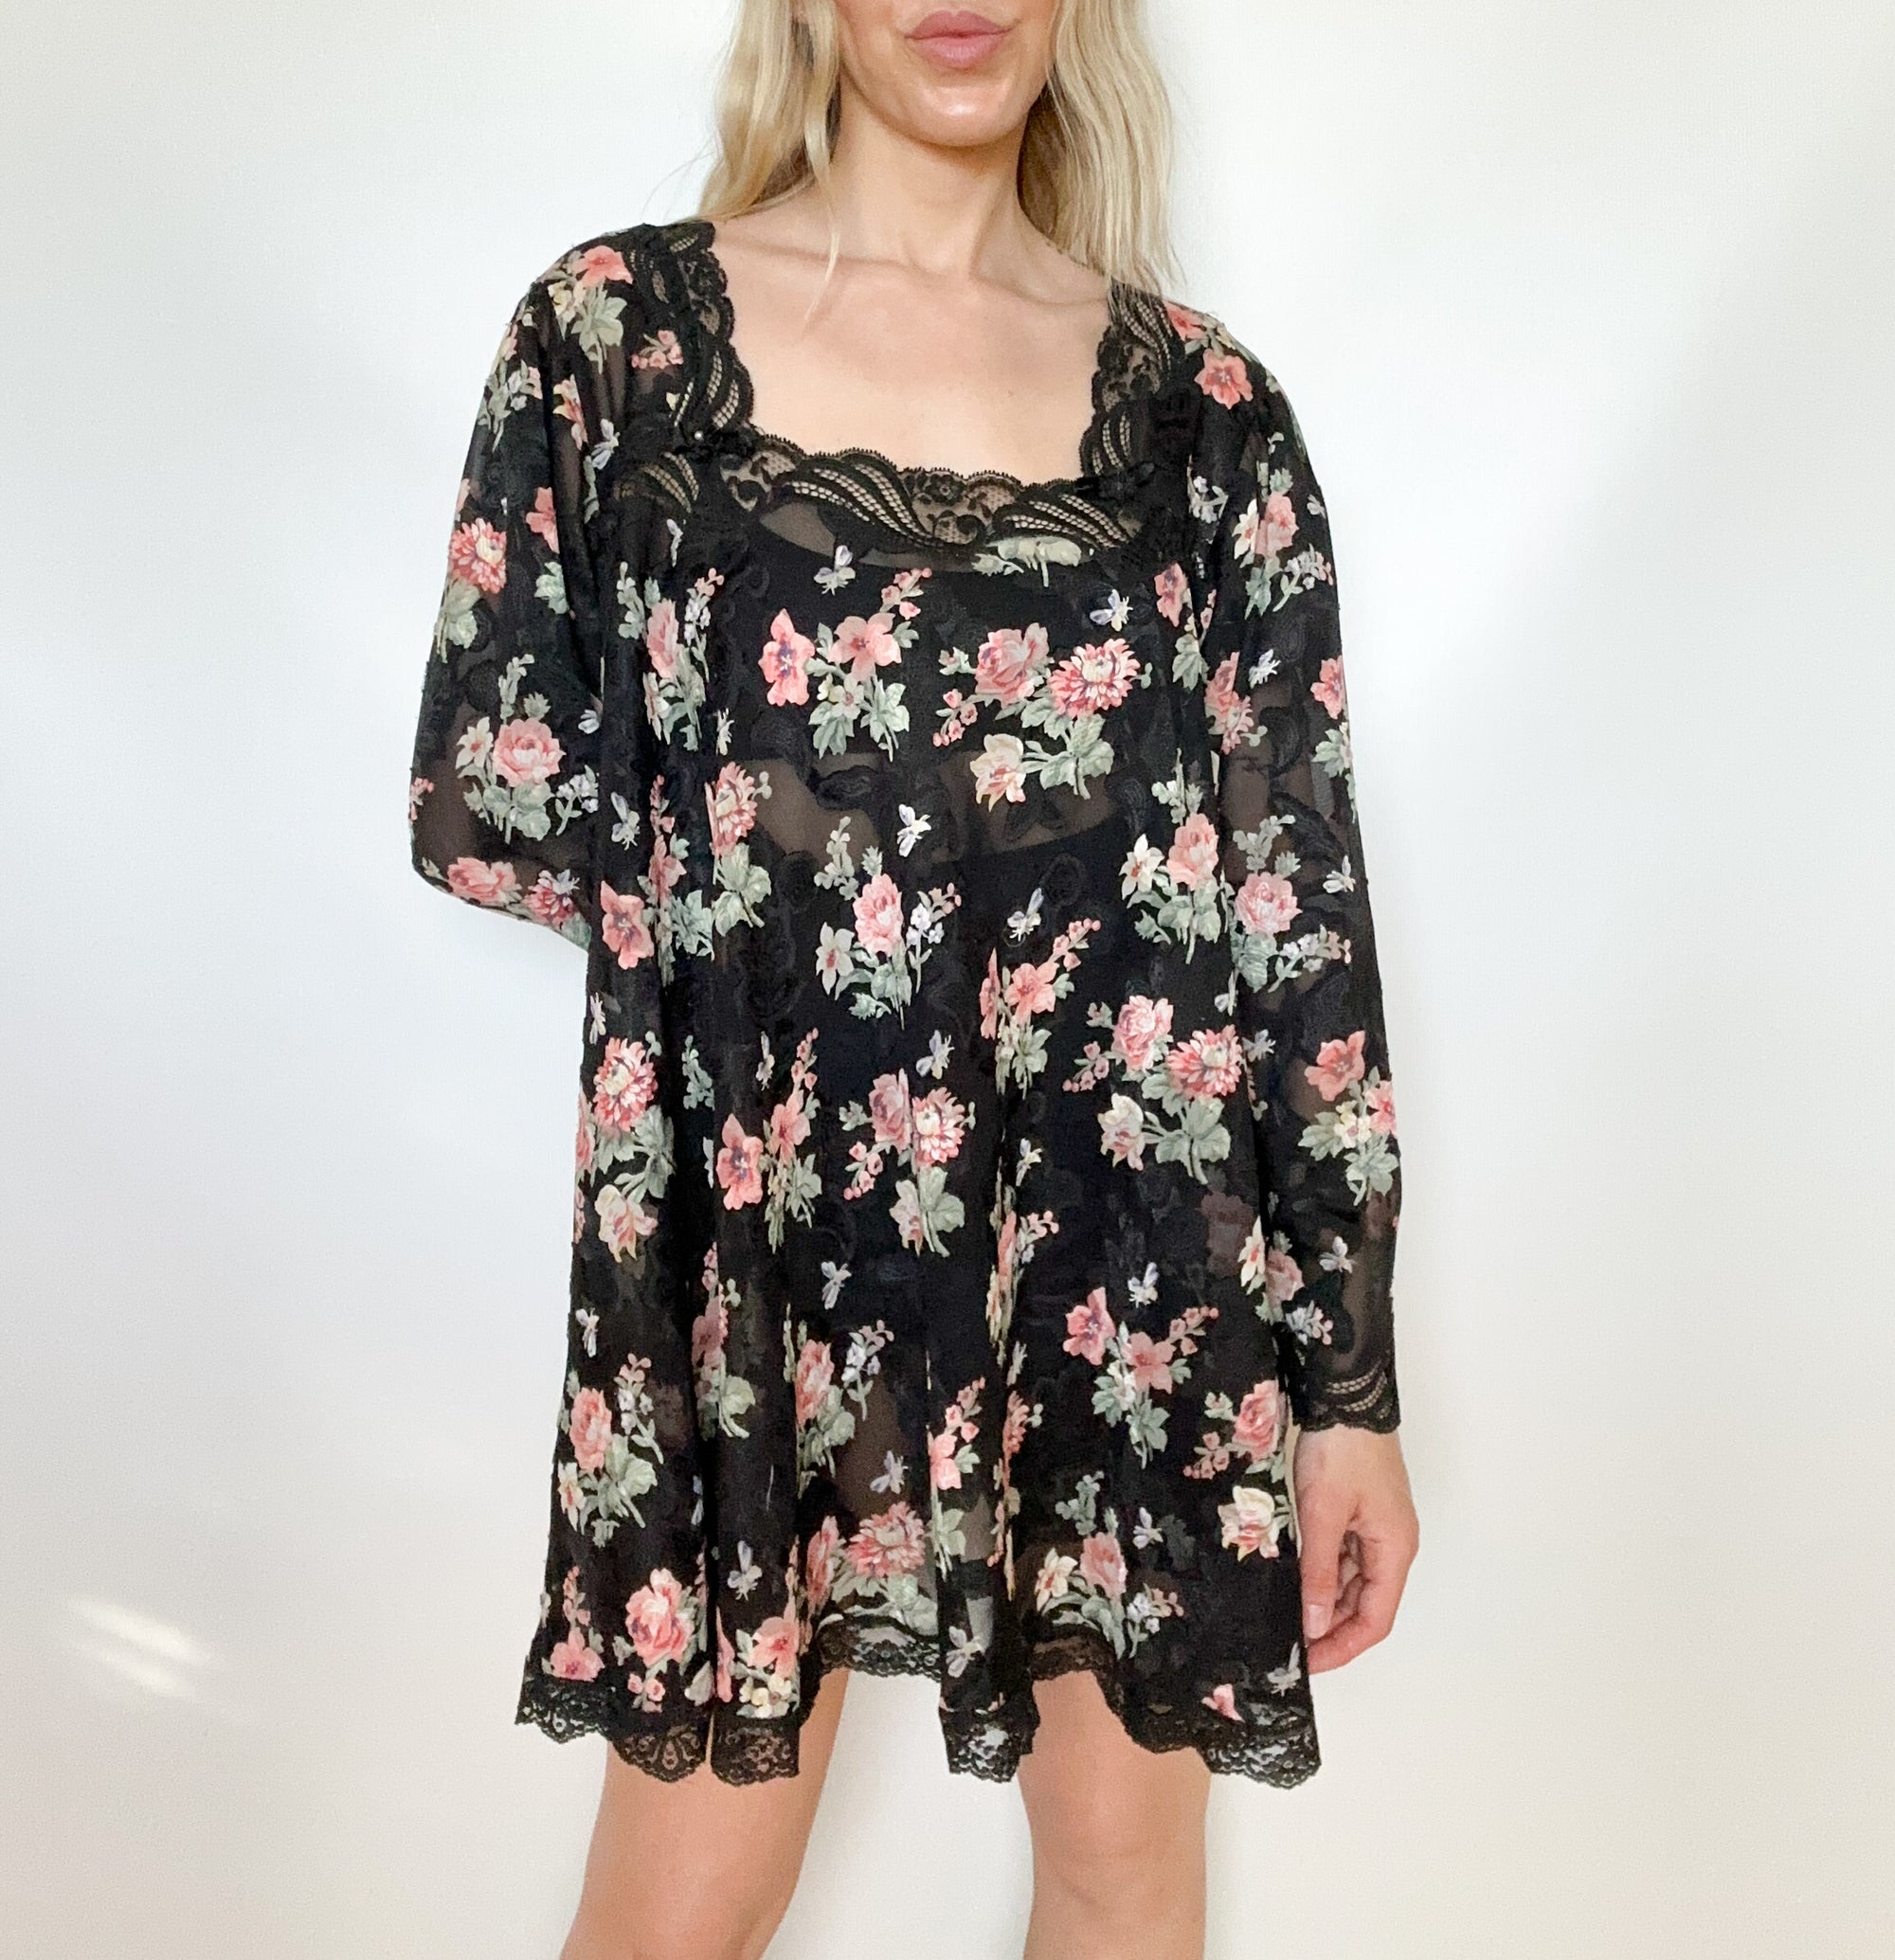 Christian Dior Floral Sheer Nightgown/Dress